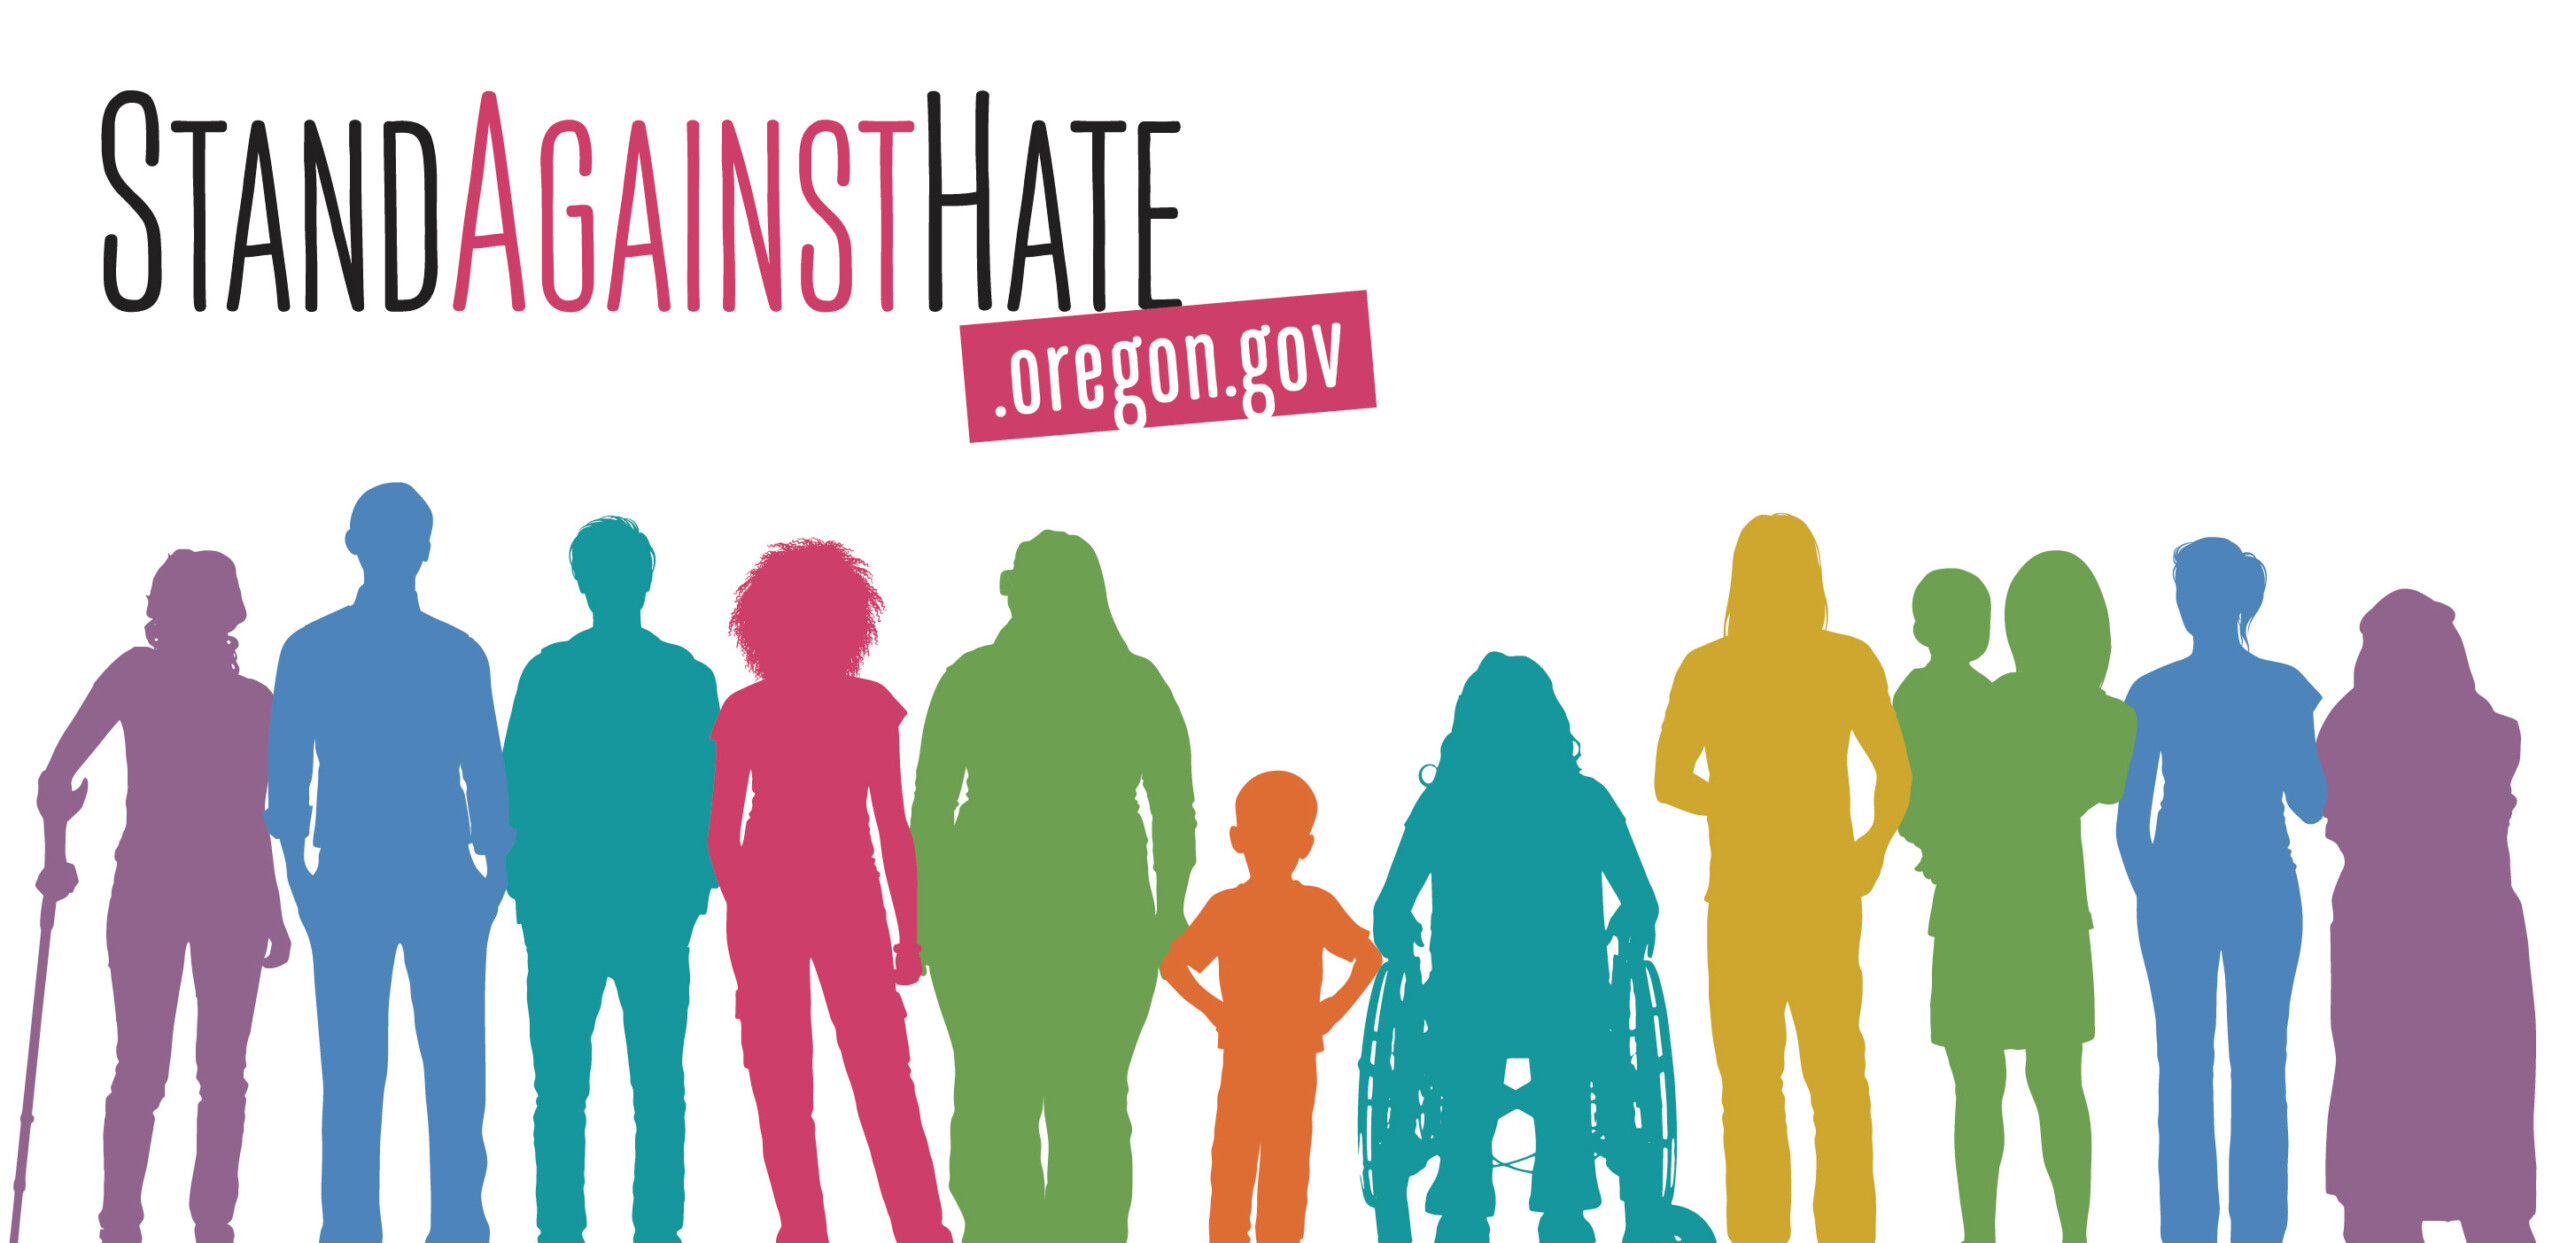 Illustration of silhouettes of diverse people from the Oregon DOJ's Stand Against Hate flyer.